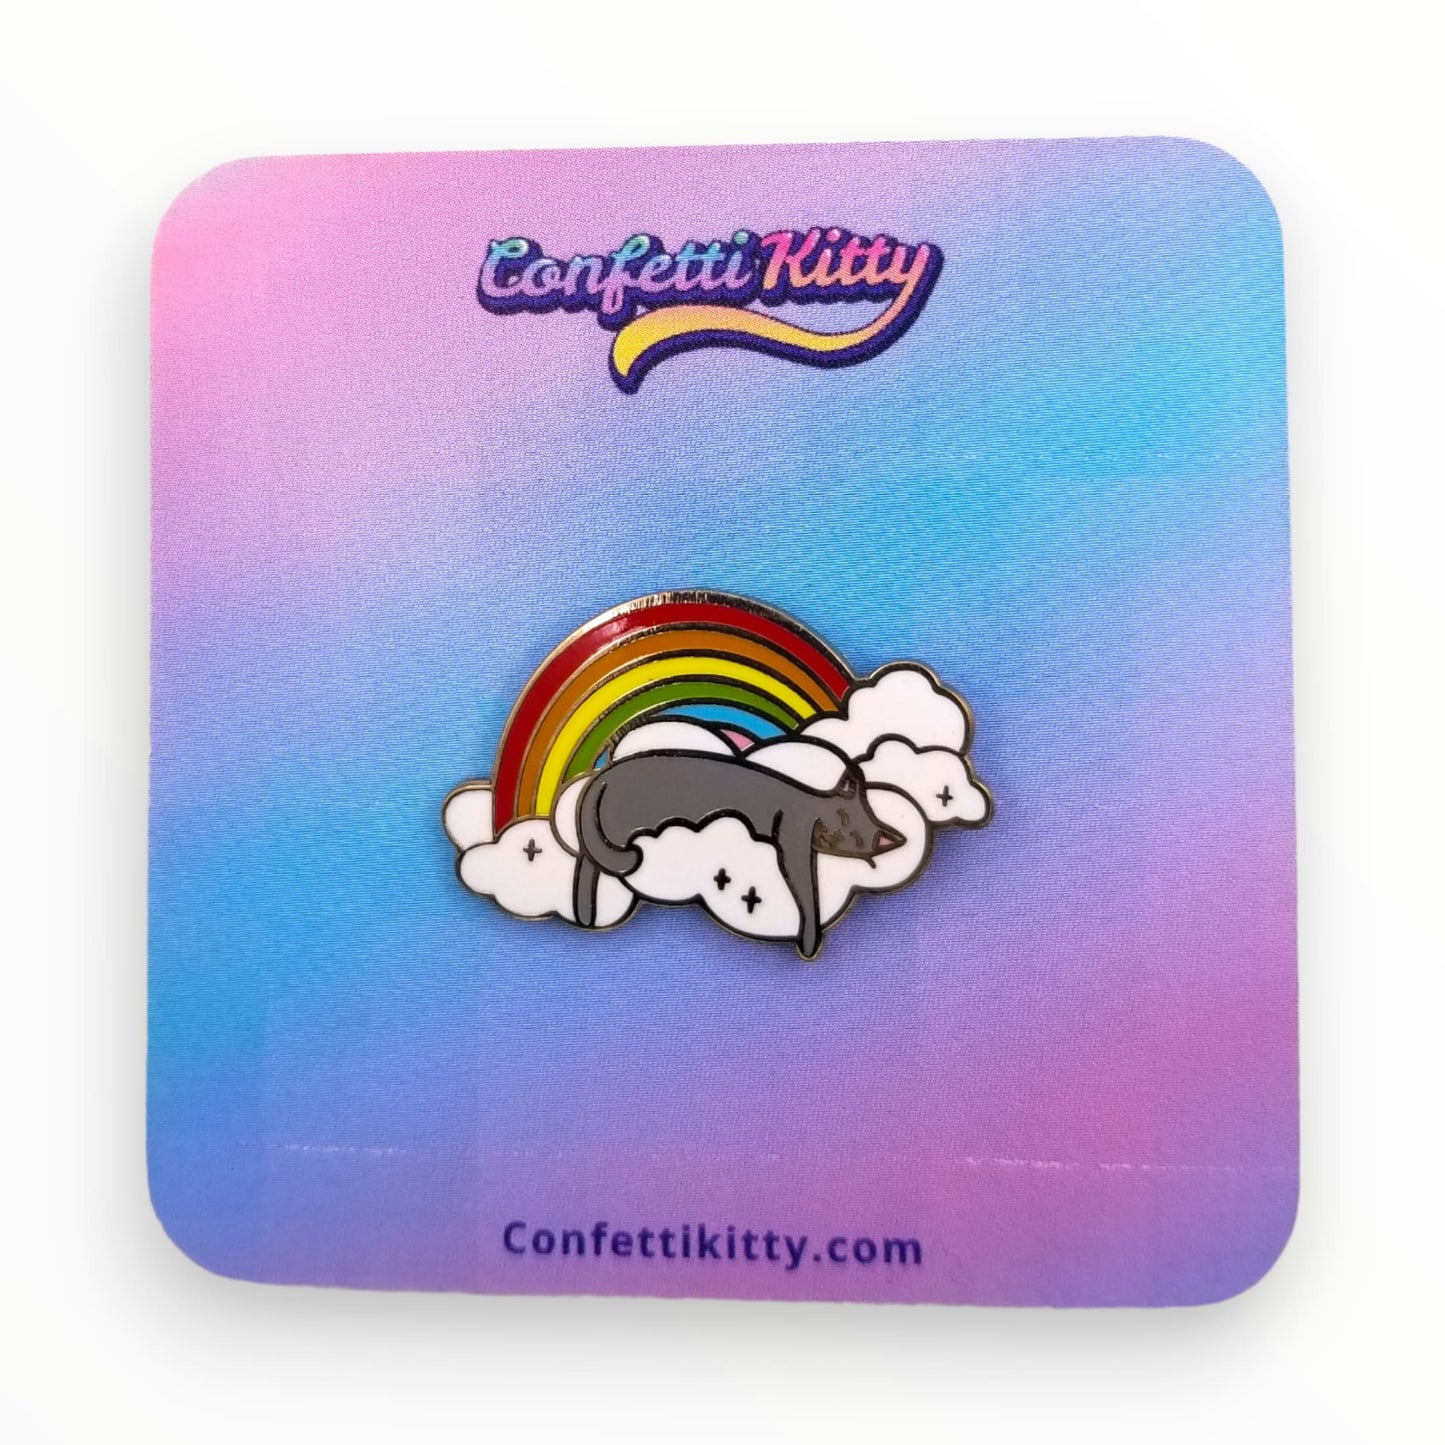 Cat on a Cloud Hard Enamel Pin from Confetti Kitty, Only 7.99